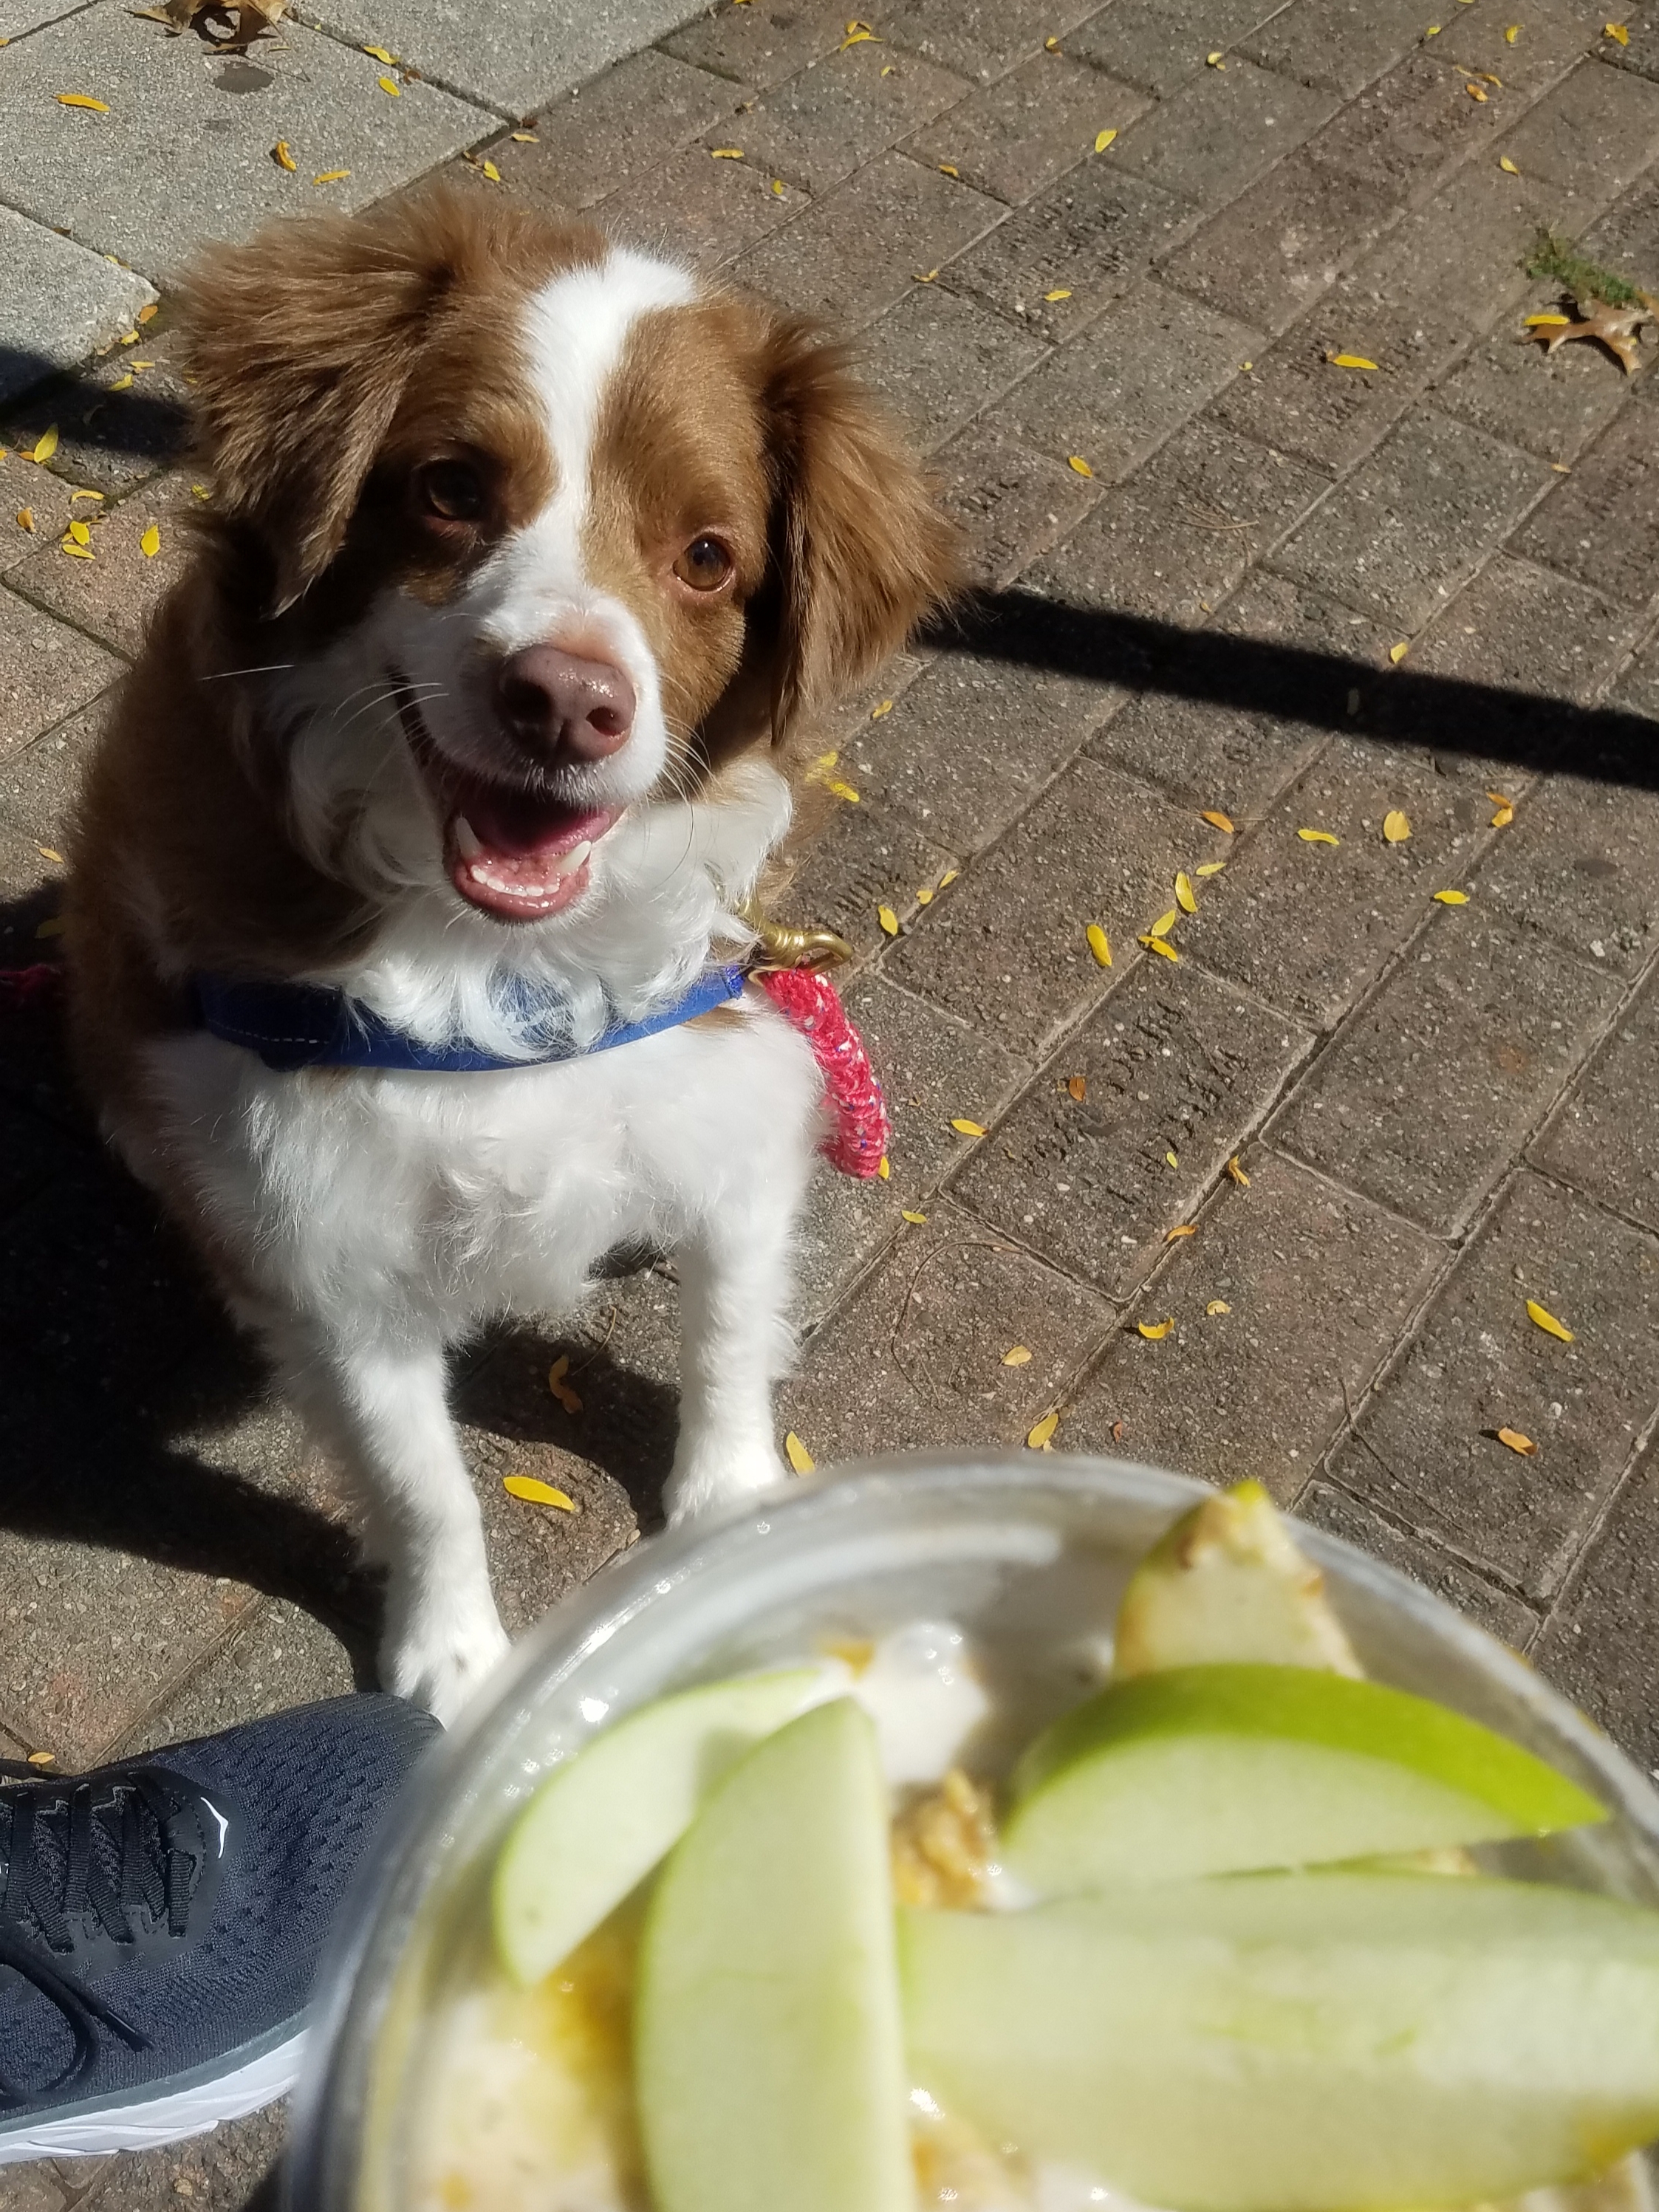 Donni with apples